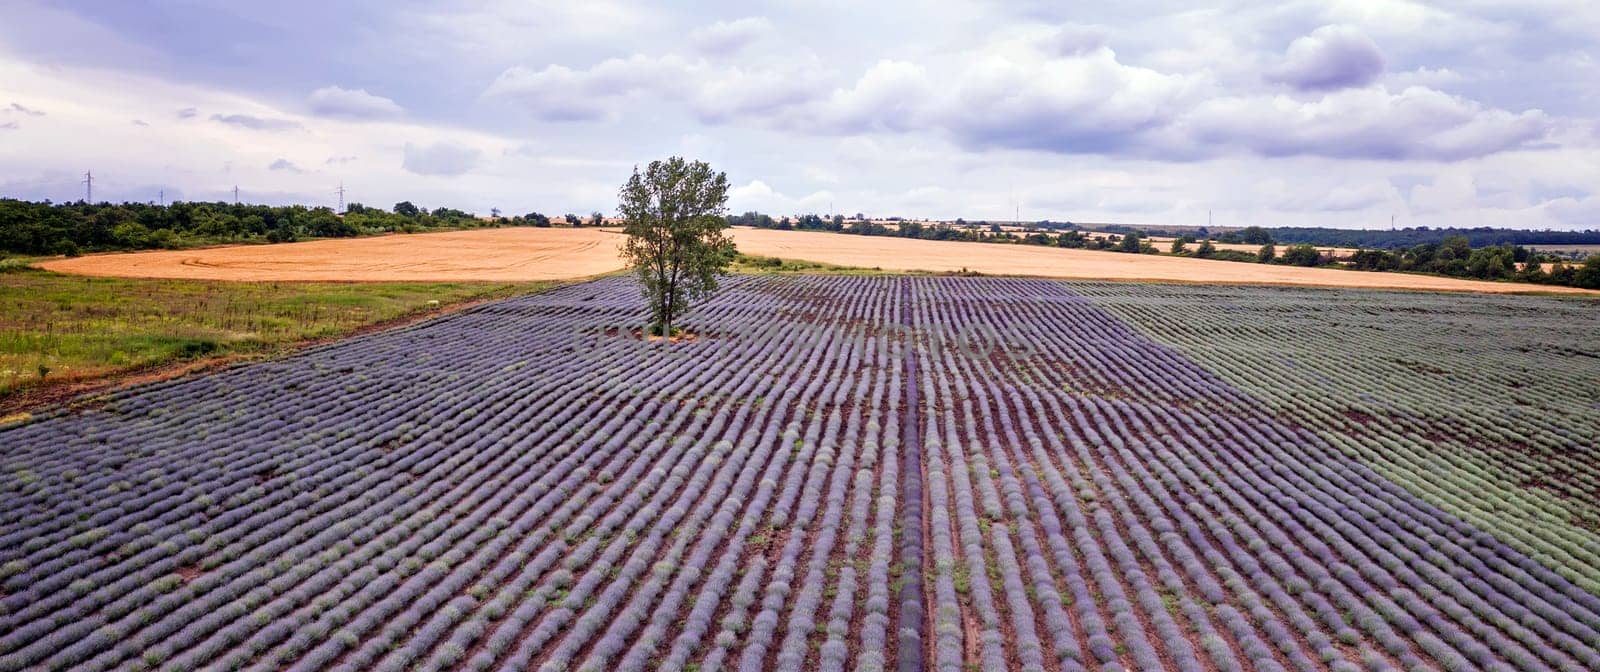 aerial landscape of blooming lavender fields with an alone tree on a cloudy day